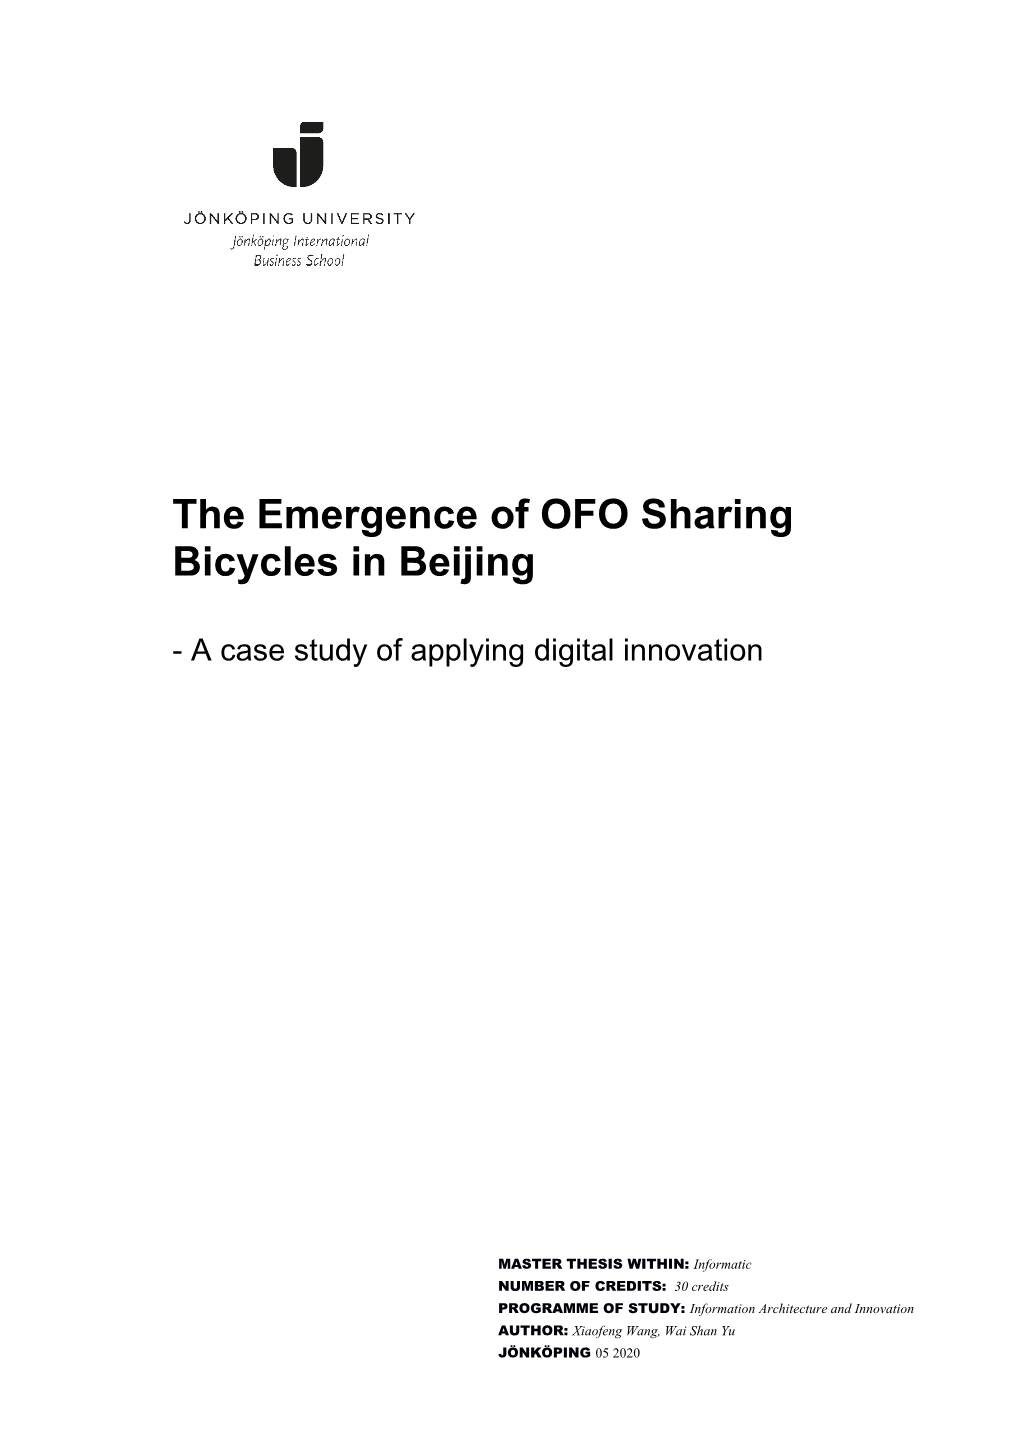 The Emergence of OFO Sharing Bicycles in Beijing